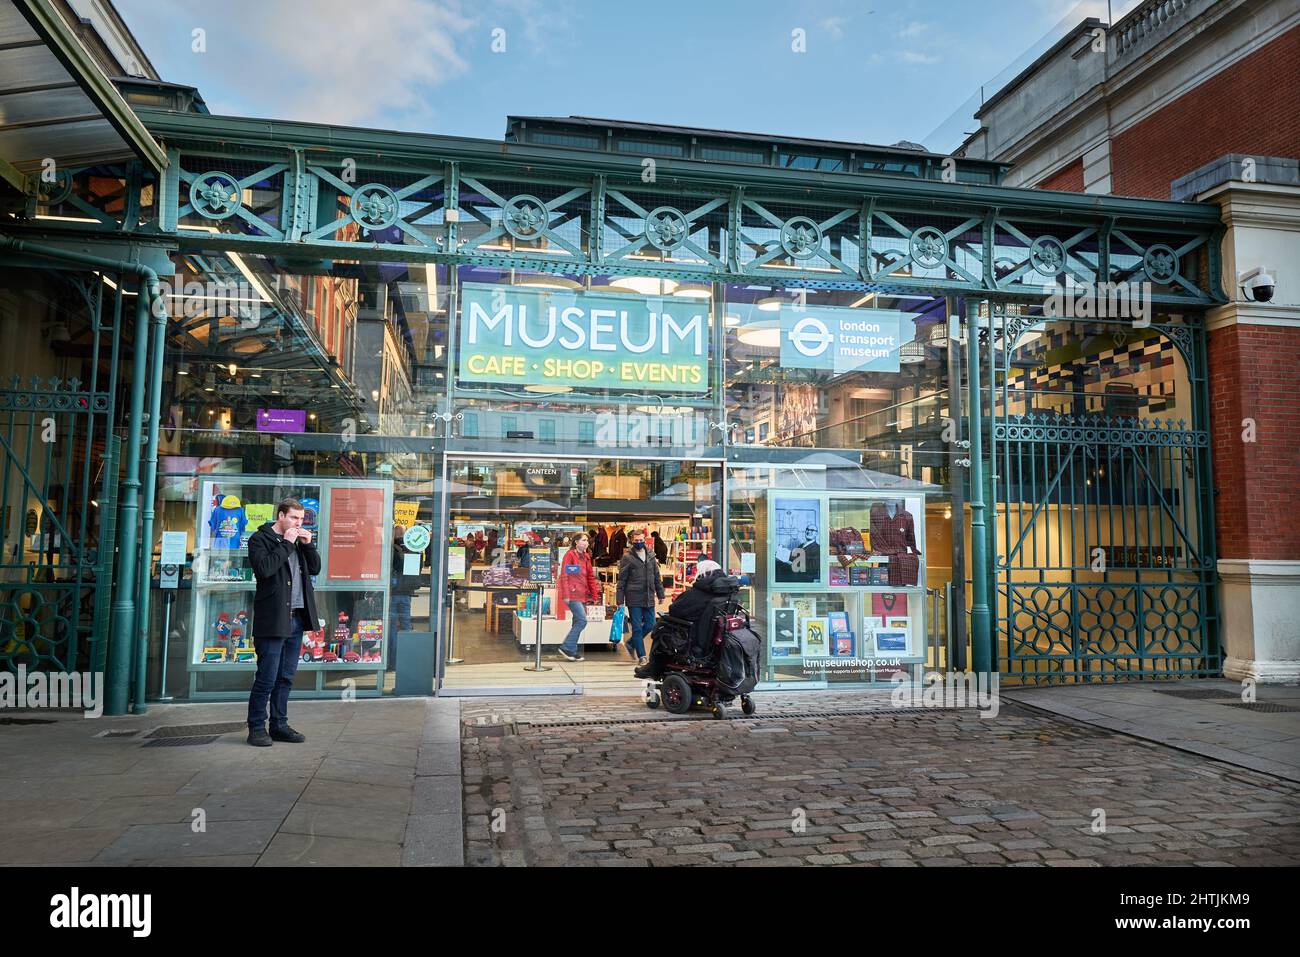 Entrance to London Transport Museum, Covent Garden, London, England. Stock Photo